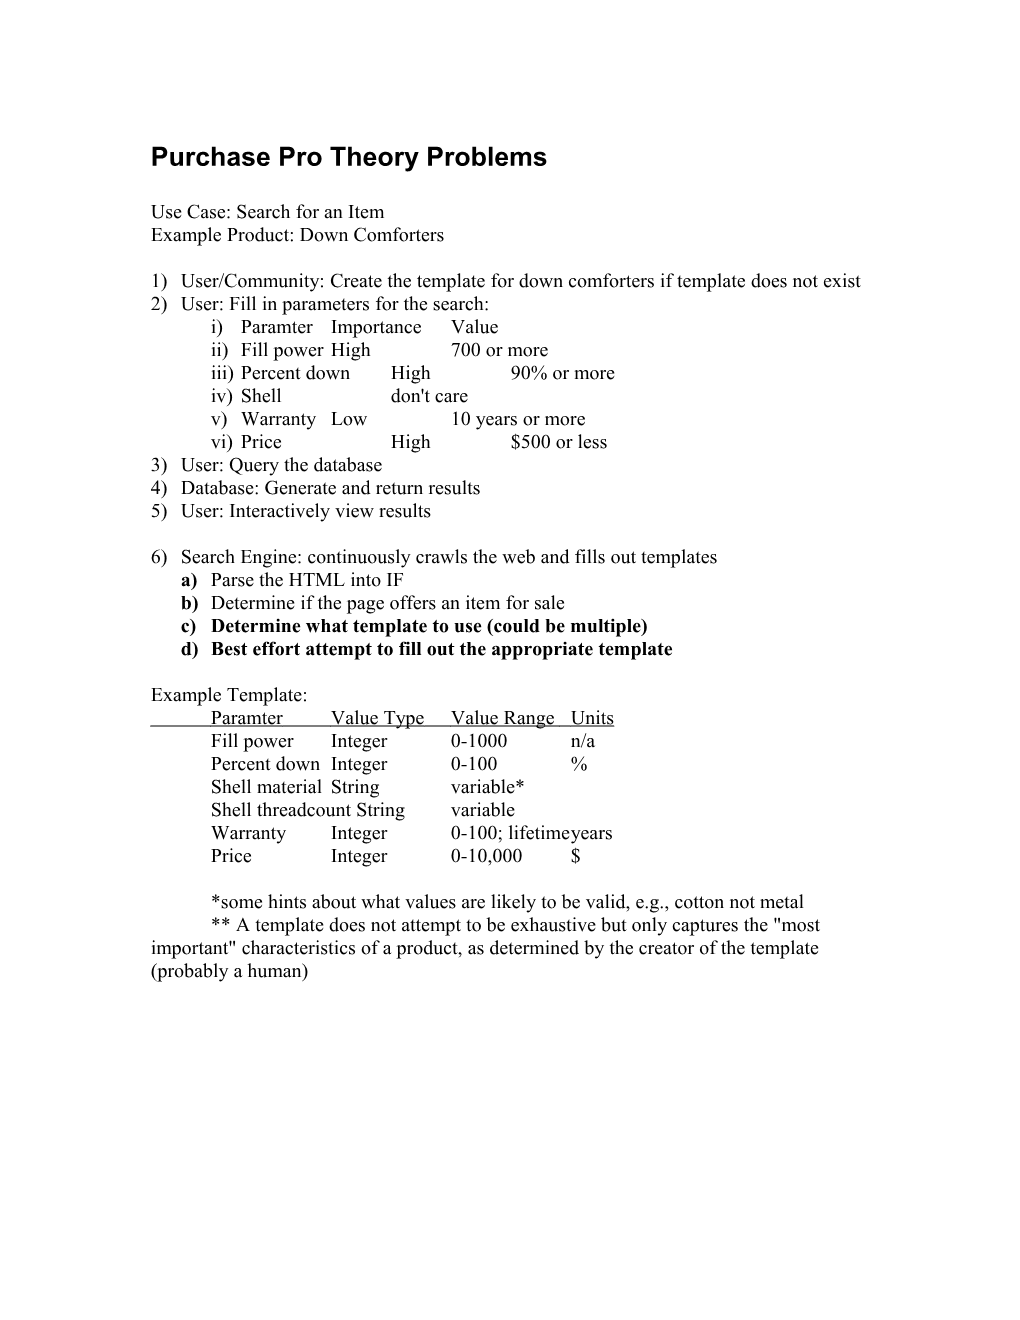 Purchase Pro Theory Problems